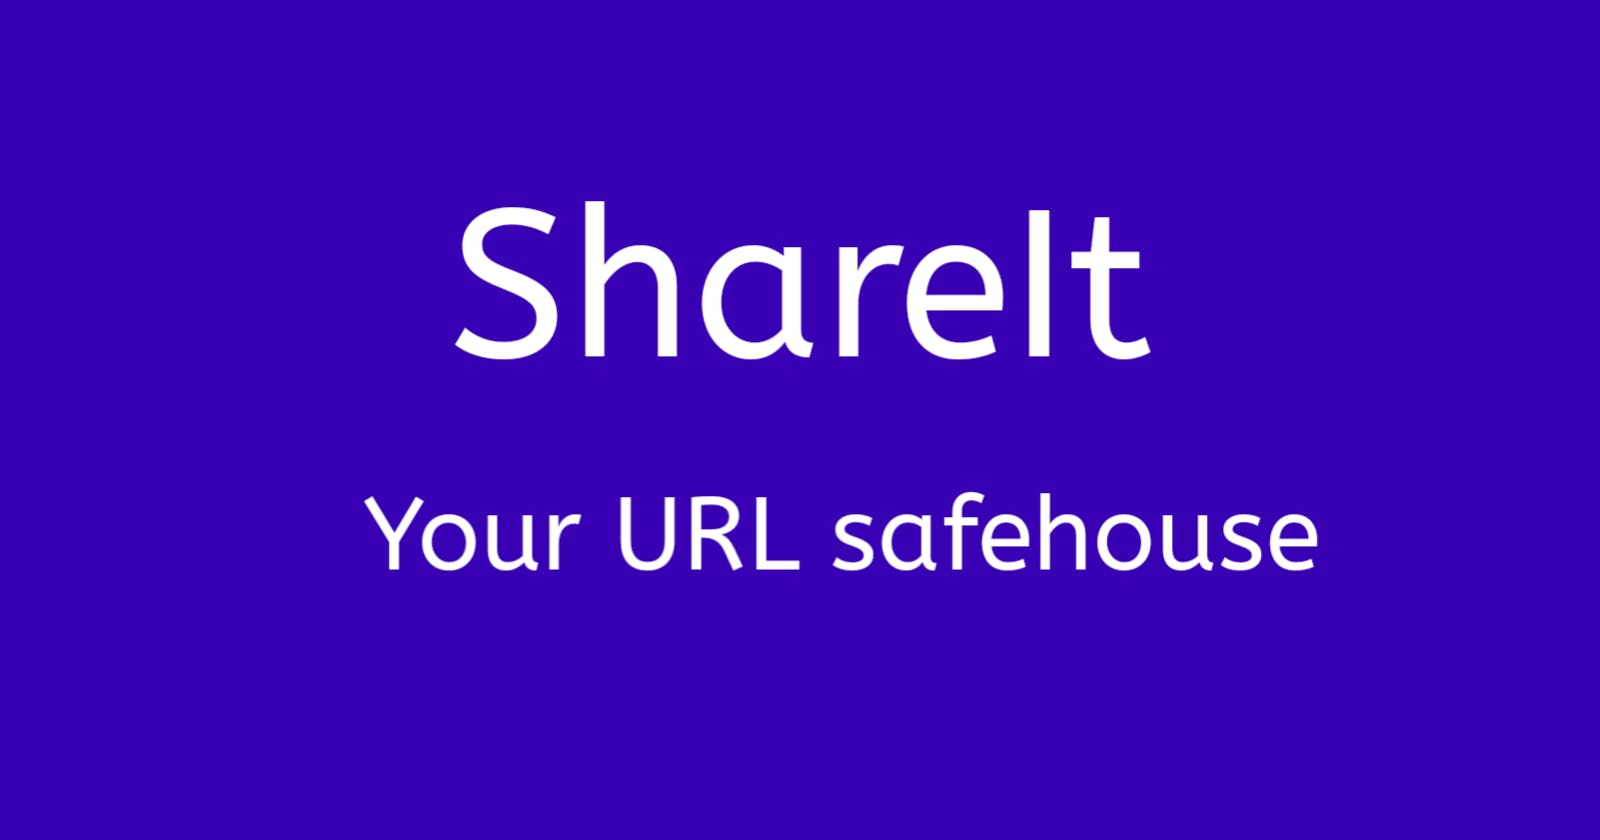 Creating a URL safehouse in Android